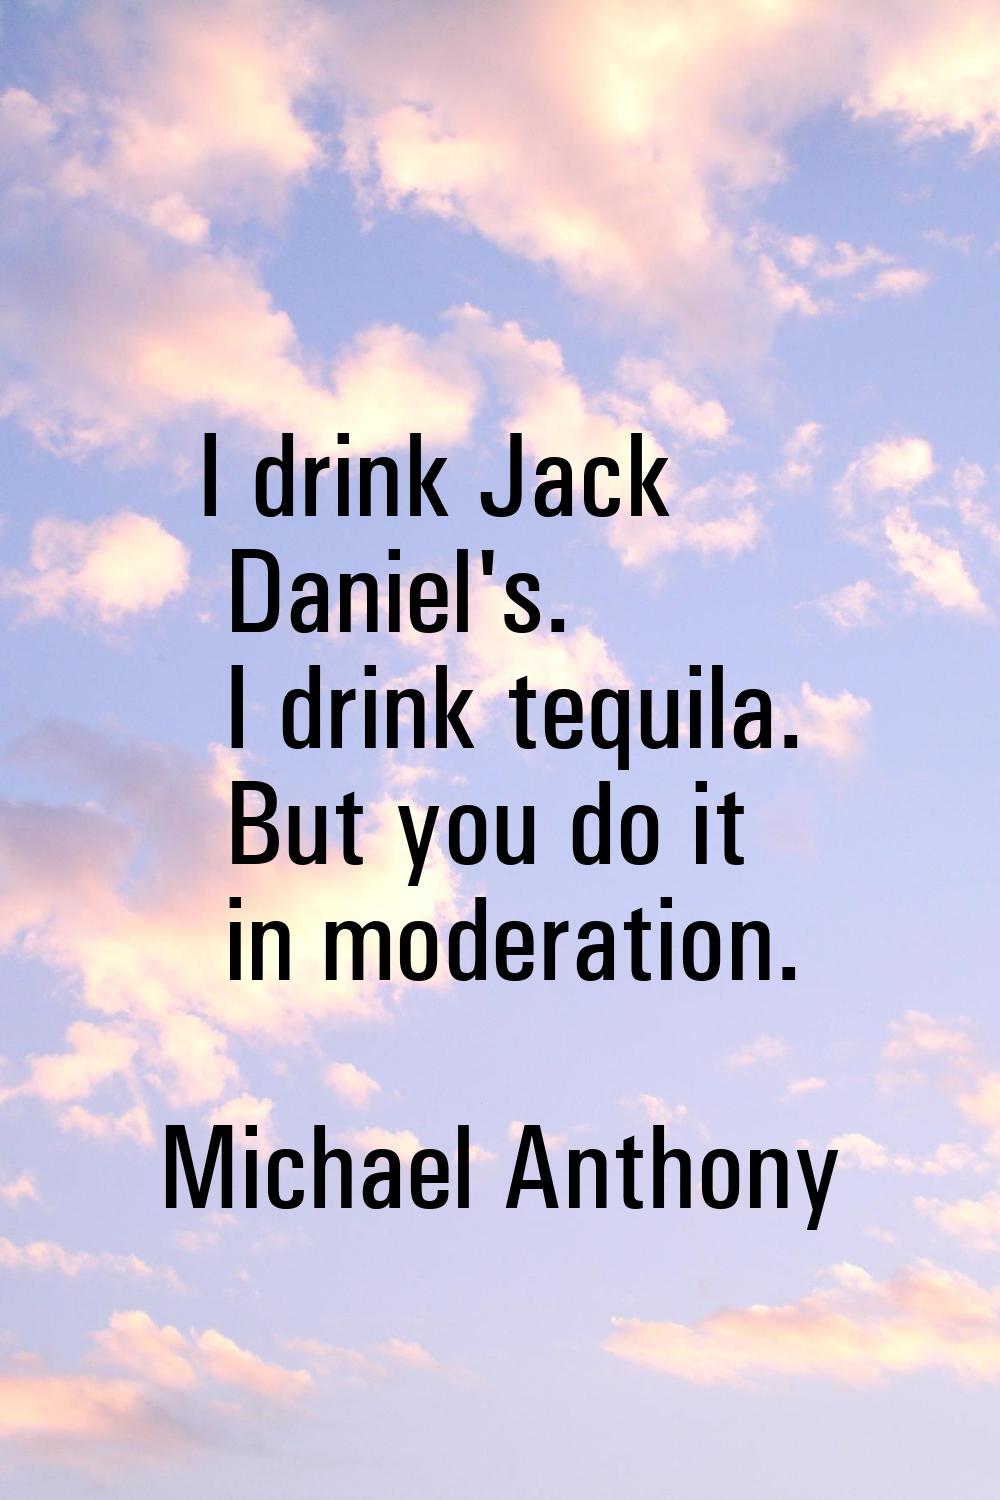 I drink Jack Daniel's. I drink tequila. But you do it in moderation.